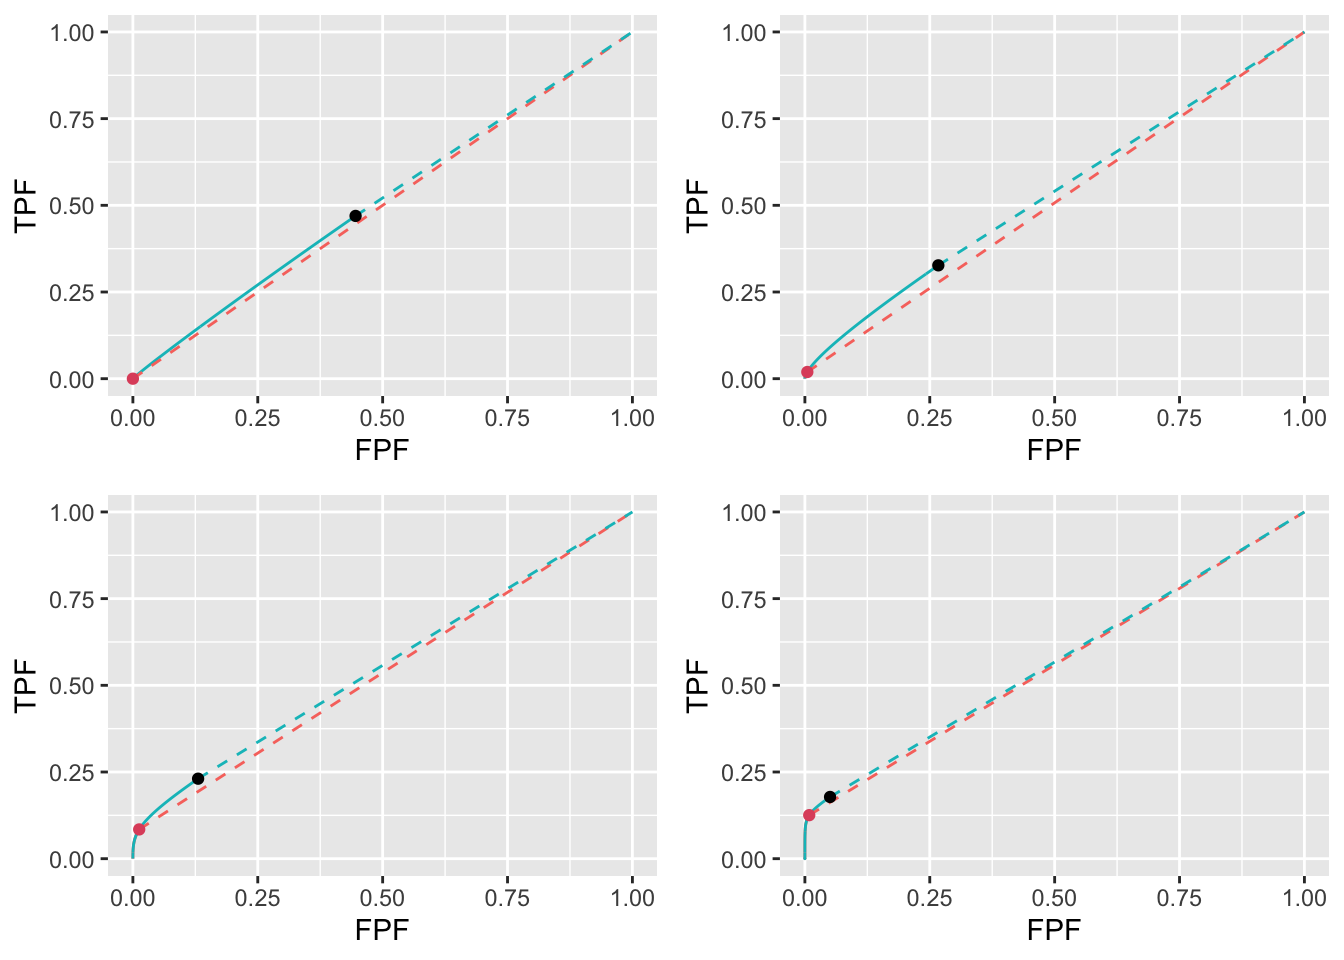 Low performance varying $\mu$ ROC plots for the two optimization methods with superimposed operating points with superimposed operating points. The color coding is as in previous figures. The values of $\mu$ are: top-left $\mu = 1$, top-right $\mu = 2$, bottom-left $\mu = 3$ and bottom-right $\mu = 4$.